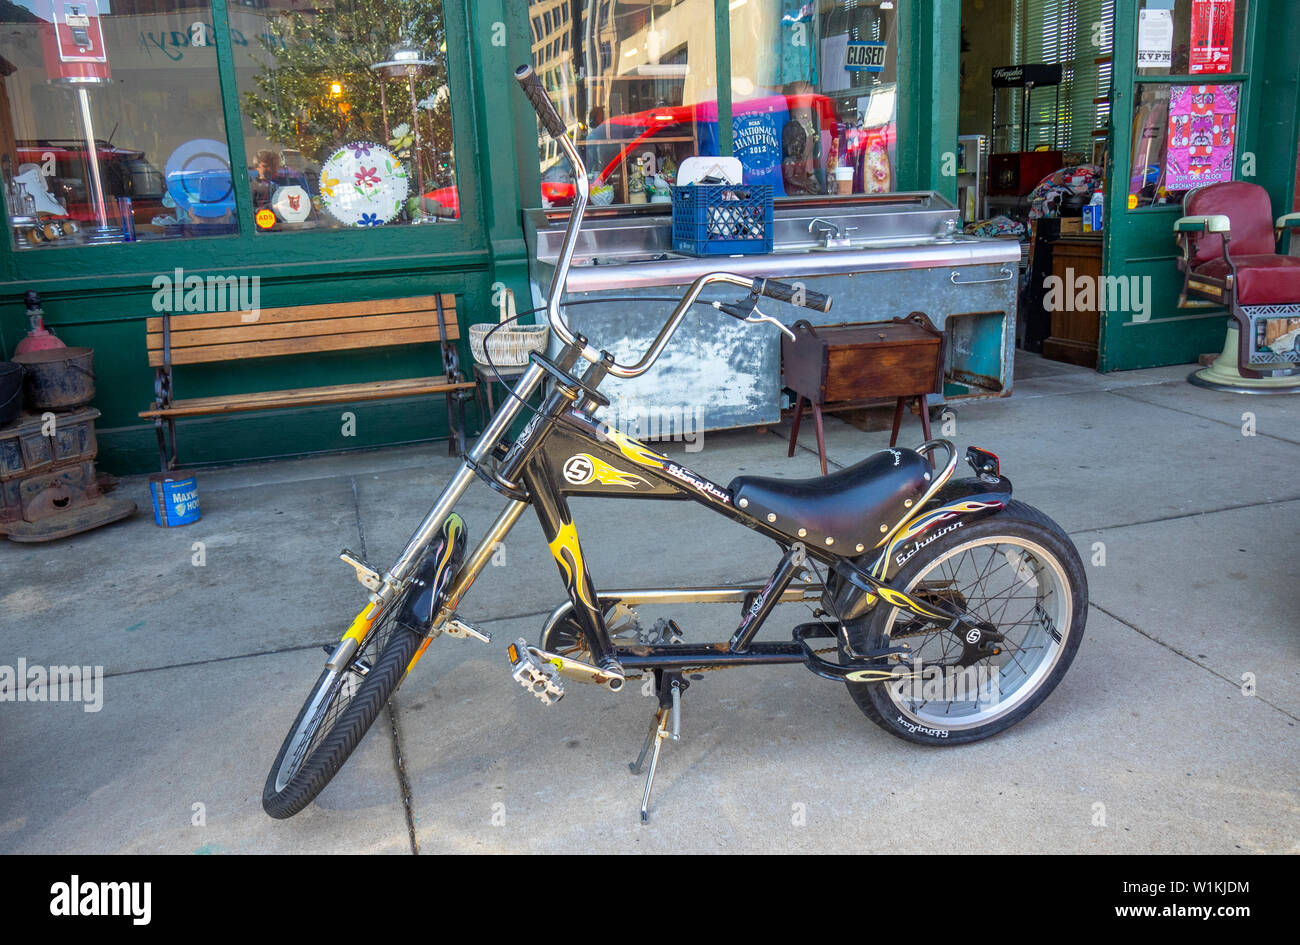 Vintage BMX bicycle on the pavement outside the Courtyard Antiques shop Paducah Kentucky USA. Stock Photo